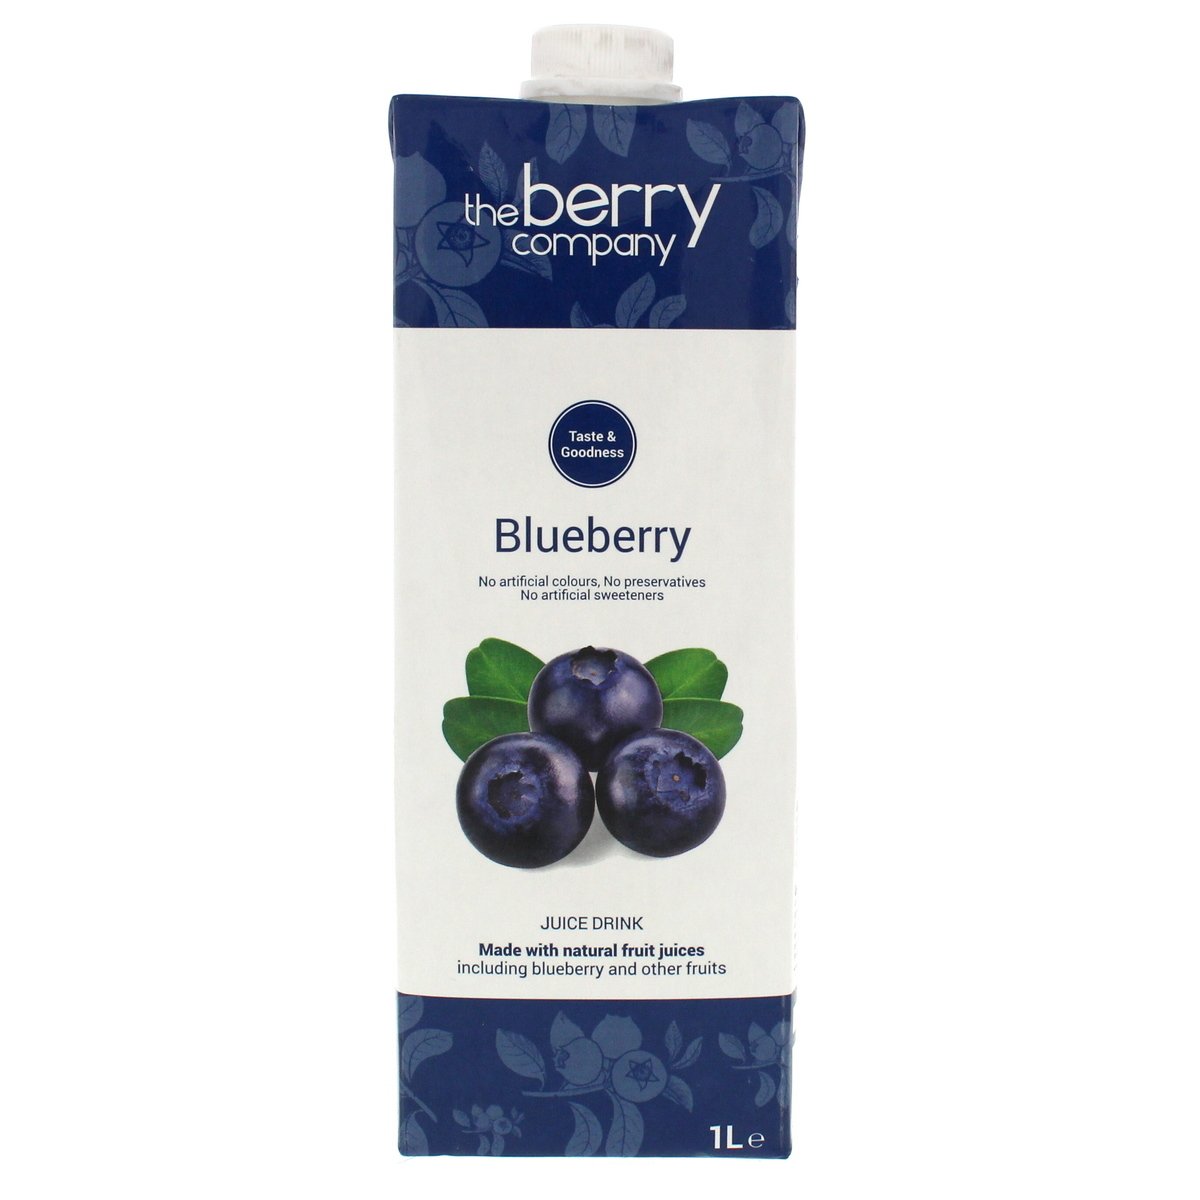 The Berry Company Blueberry Juice Drink 1Litre